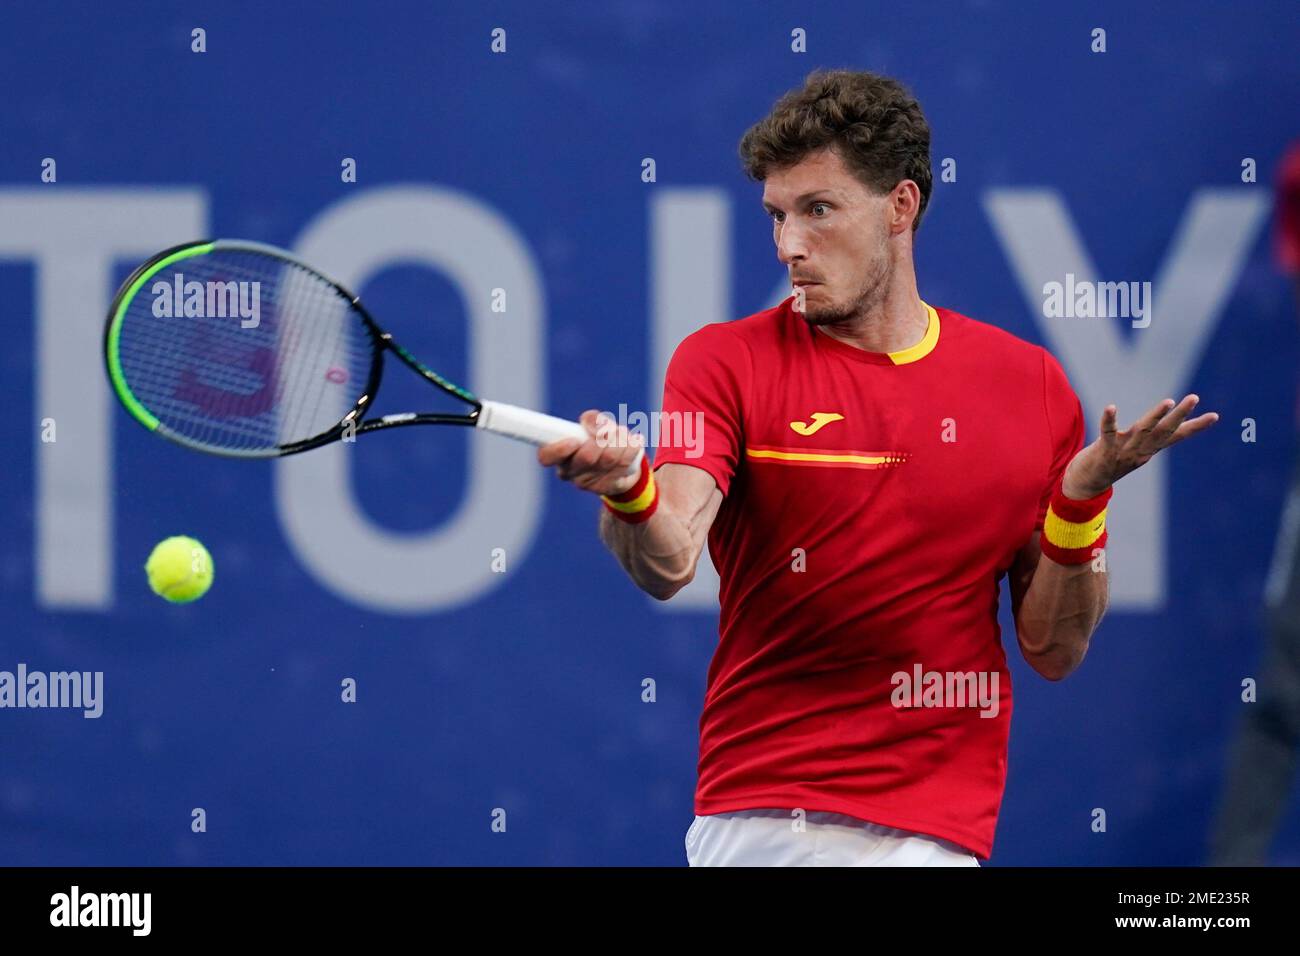 Pablo Carreno Busta, of Spain, returns a shot to Novak Djokovic, of Serbia, during the bronze medal match of the tennis competition at the 2020 Summer Olympics, Saturday, July 31, 2021, in